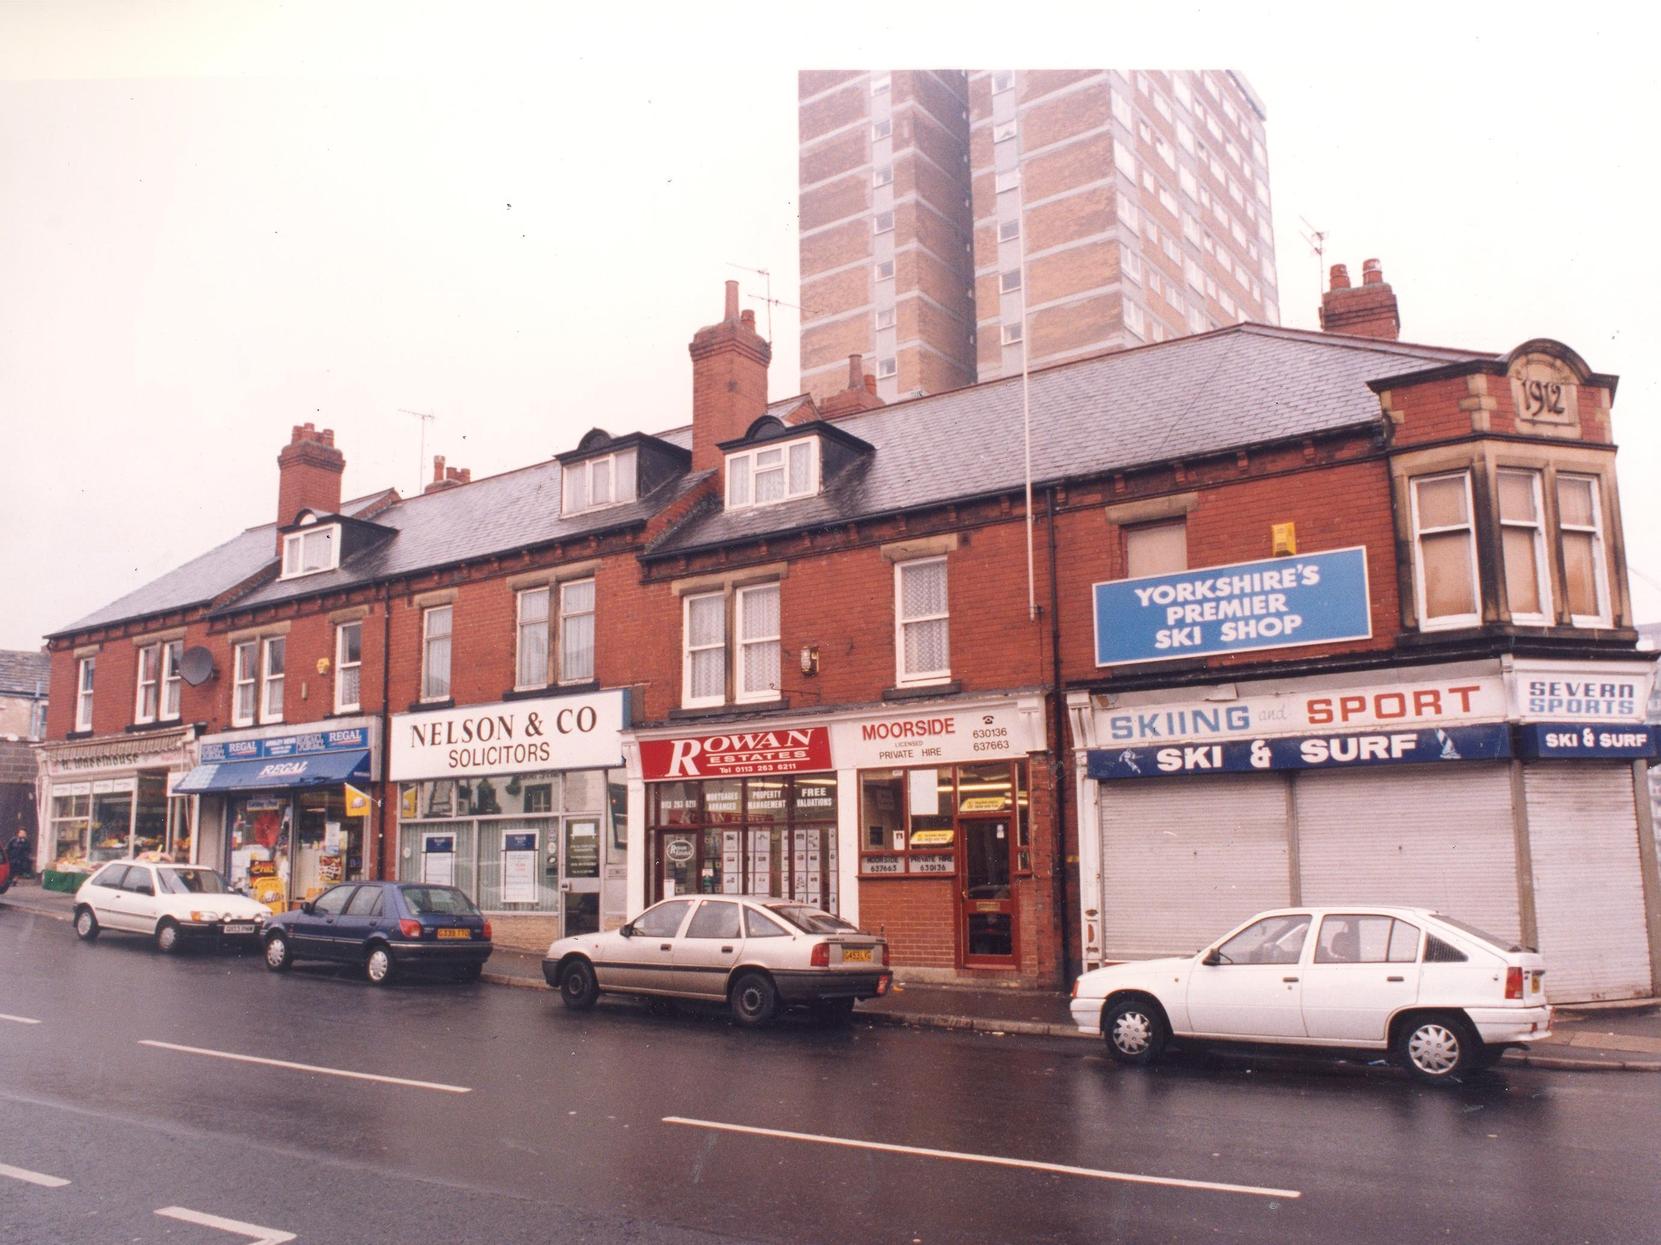 Town Street in Armley. Do you remember these shops?